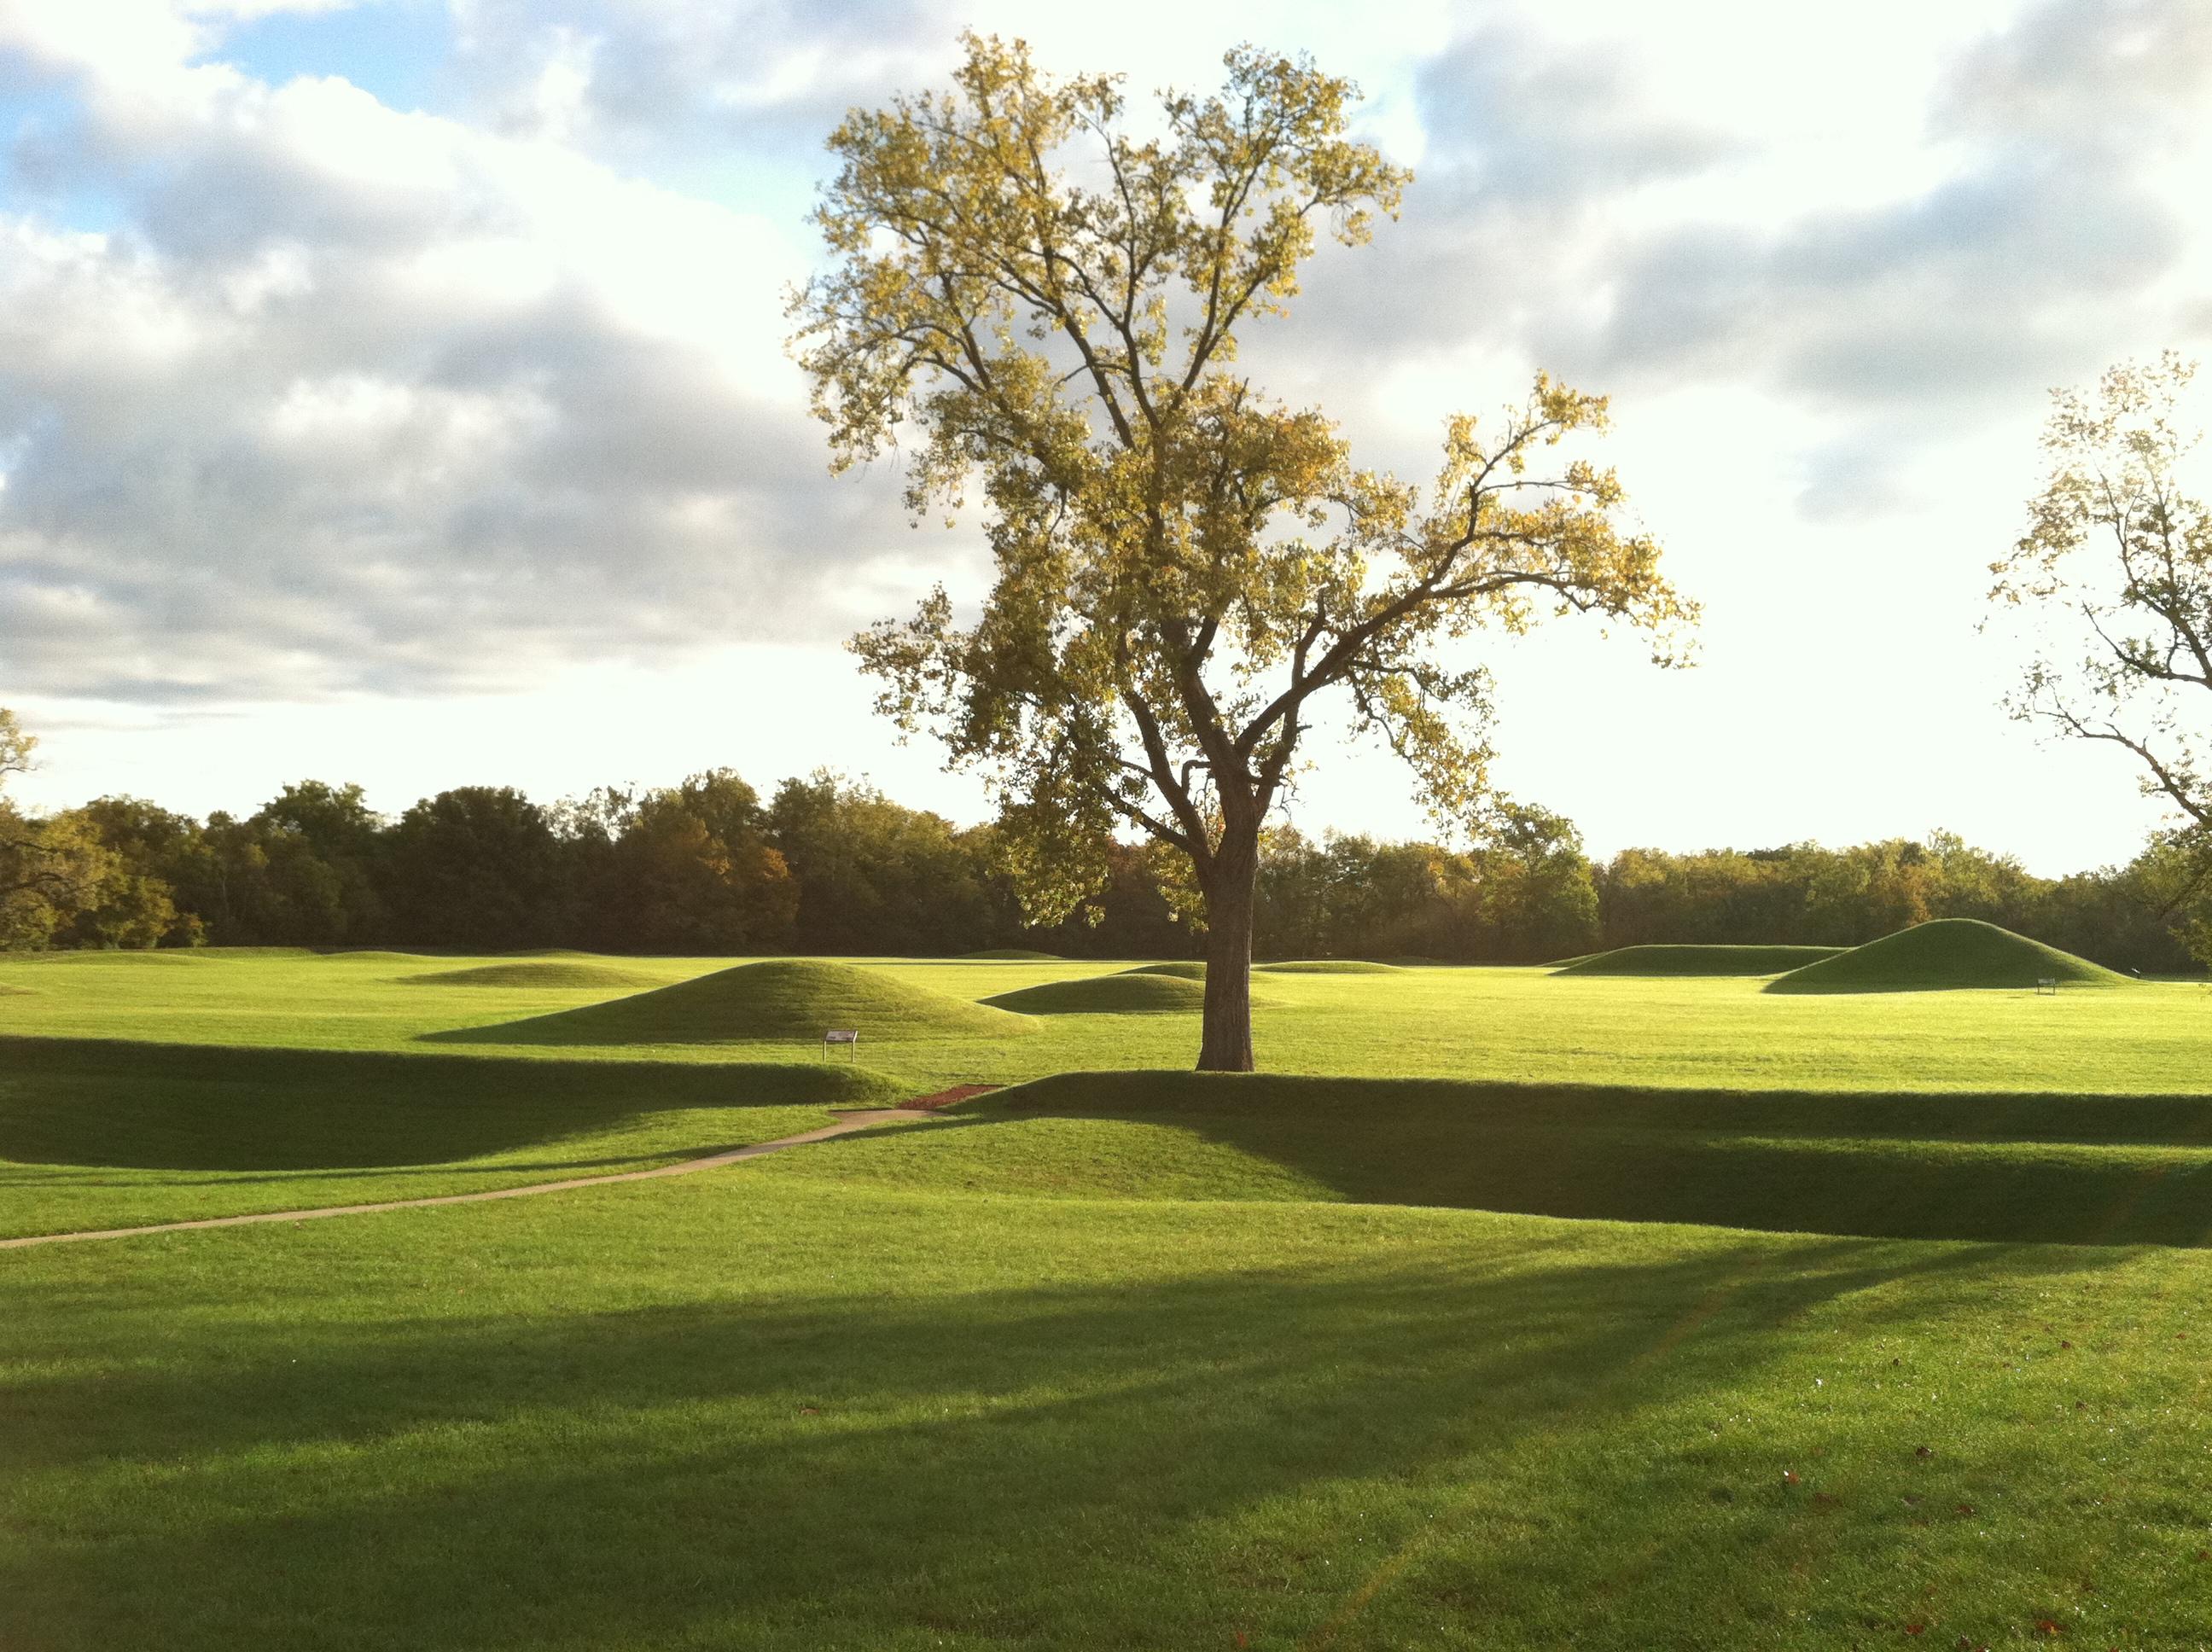 An early morning sun casting long shadows over grass-covered mounds.